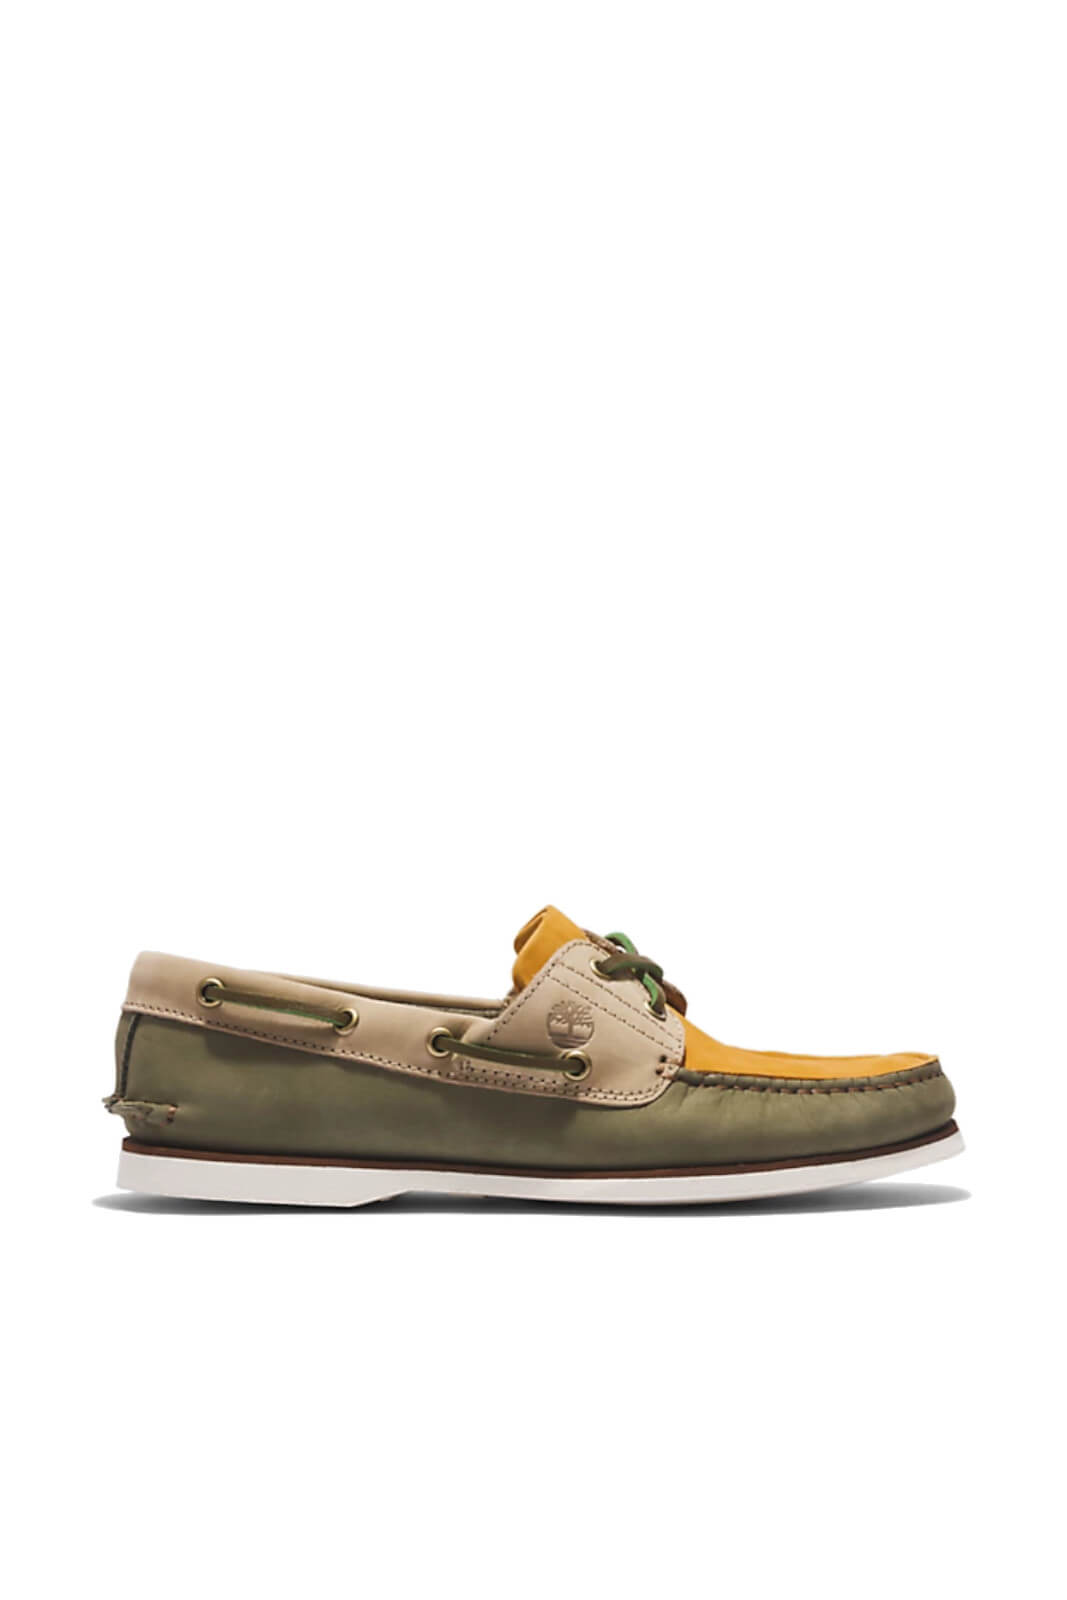 Timberland CLASSIC BOAT men's moccasins